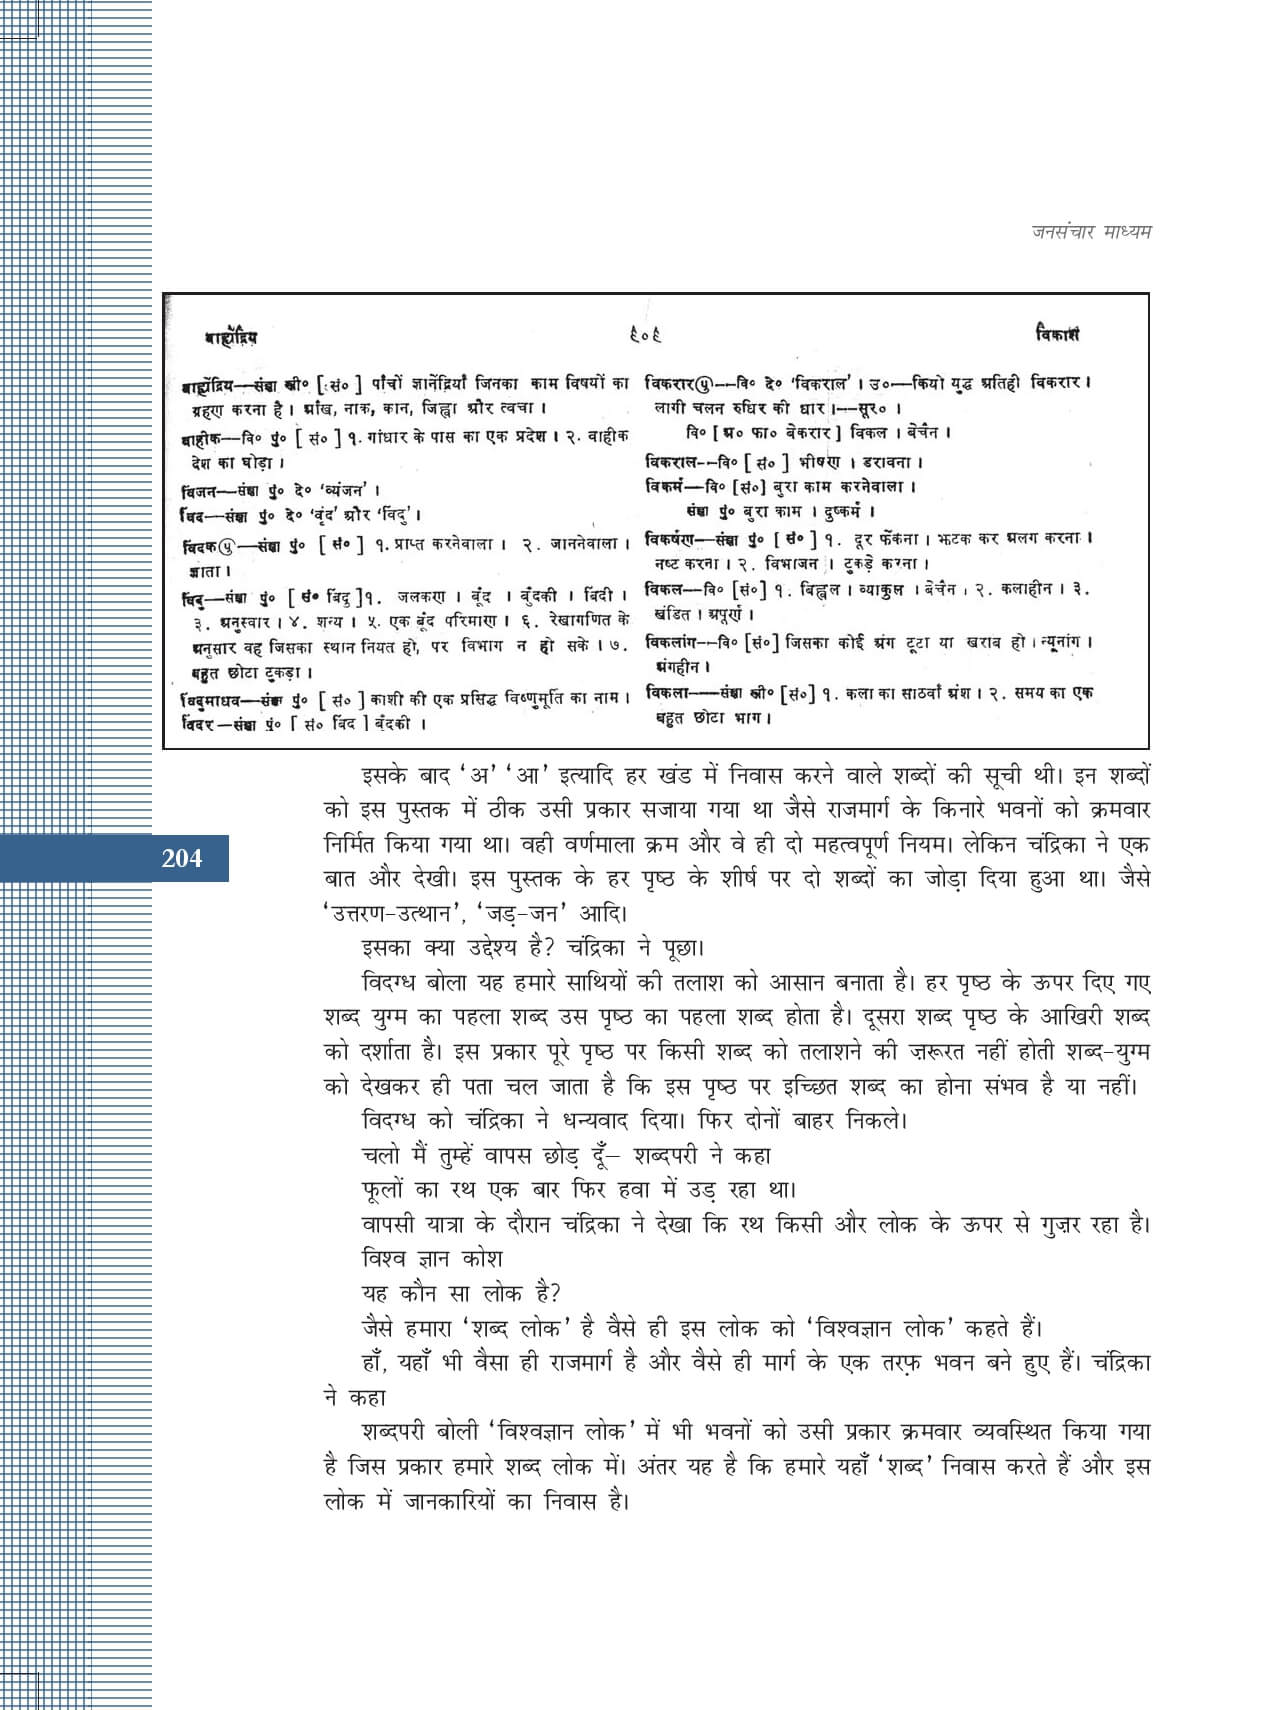 abhivyakti aur madhyam class 12 questions and answers